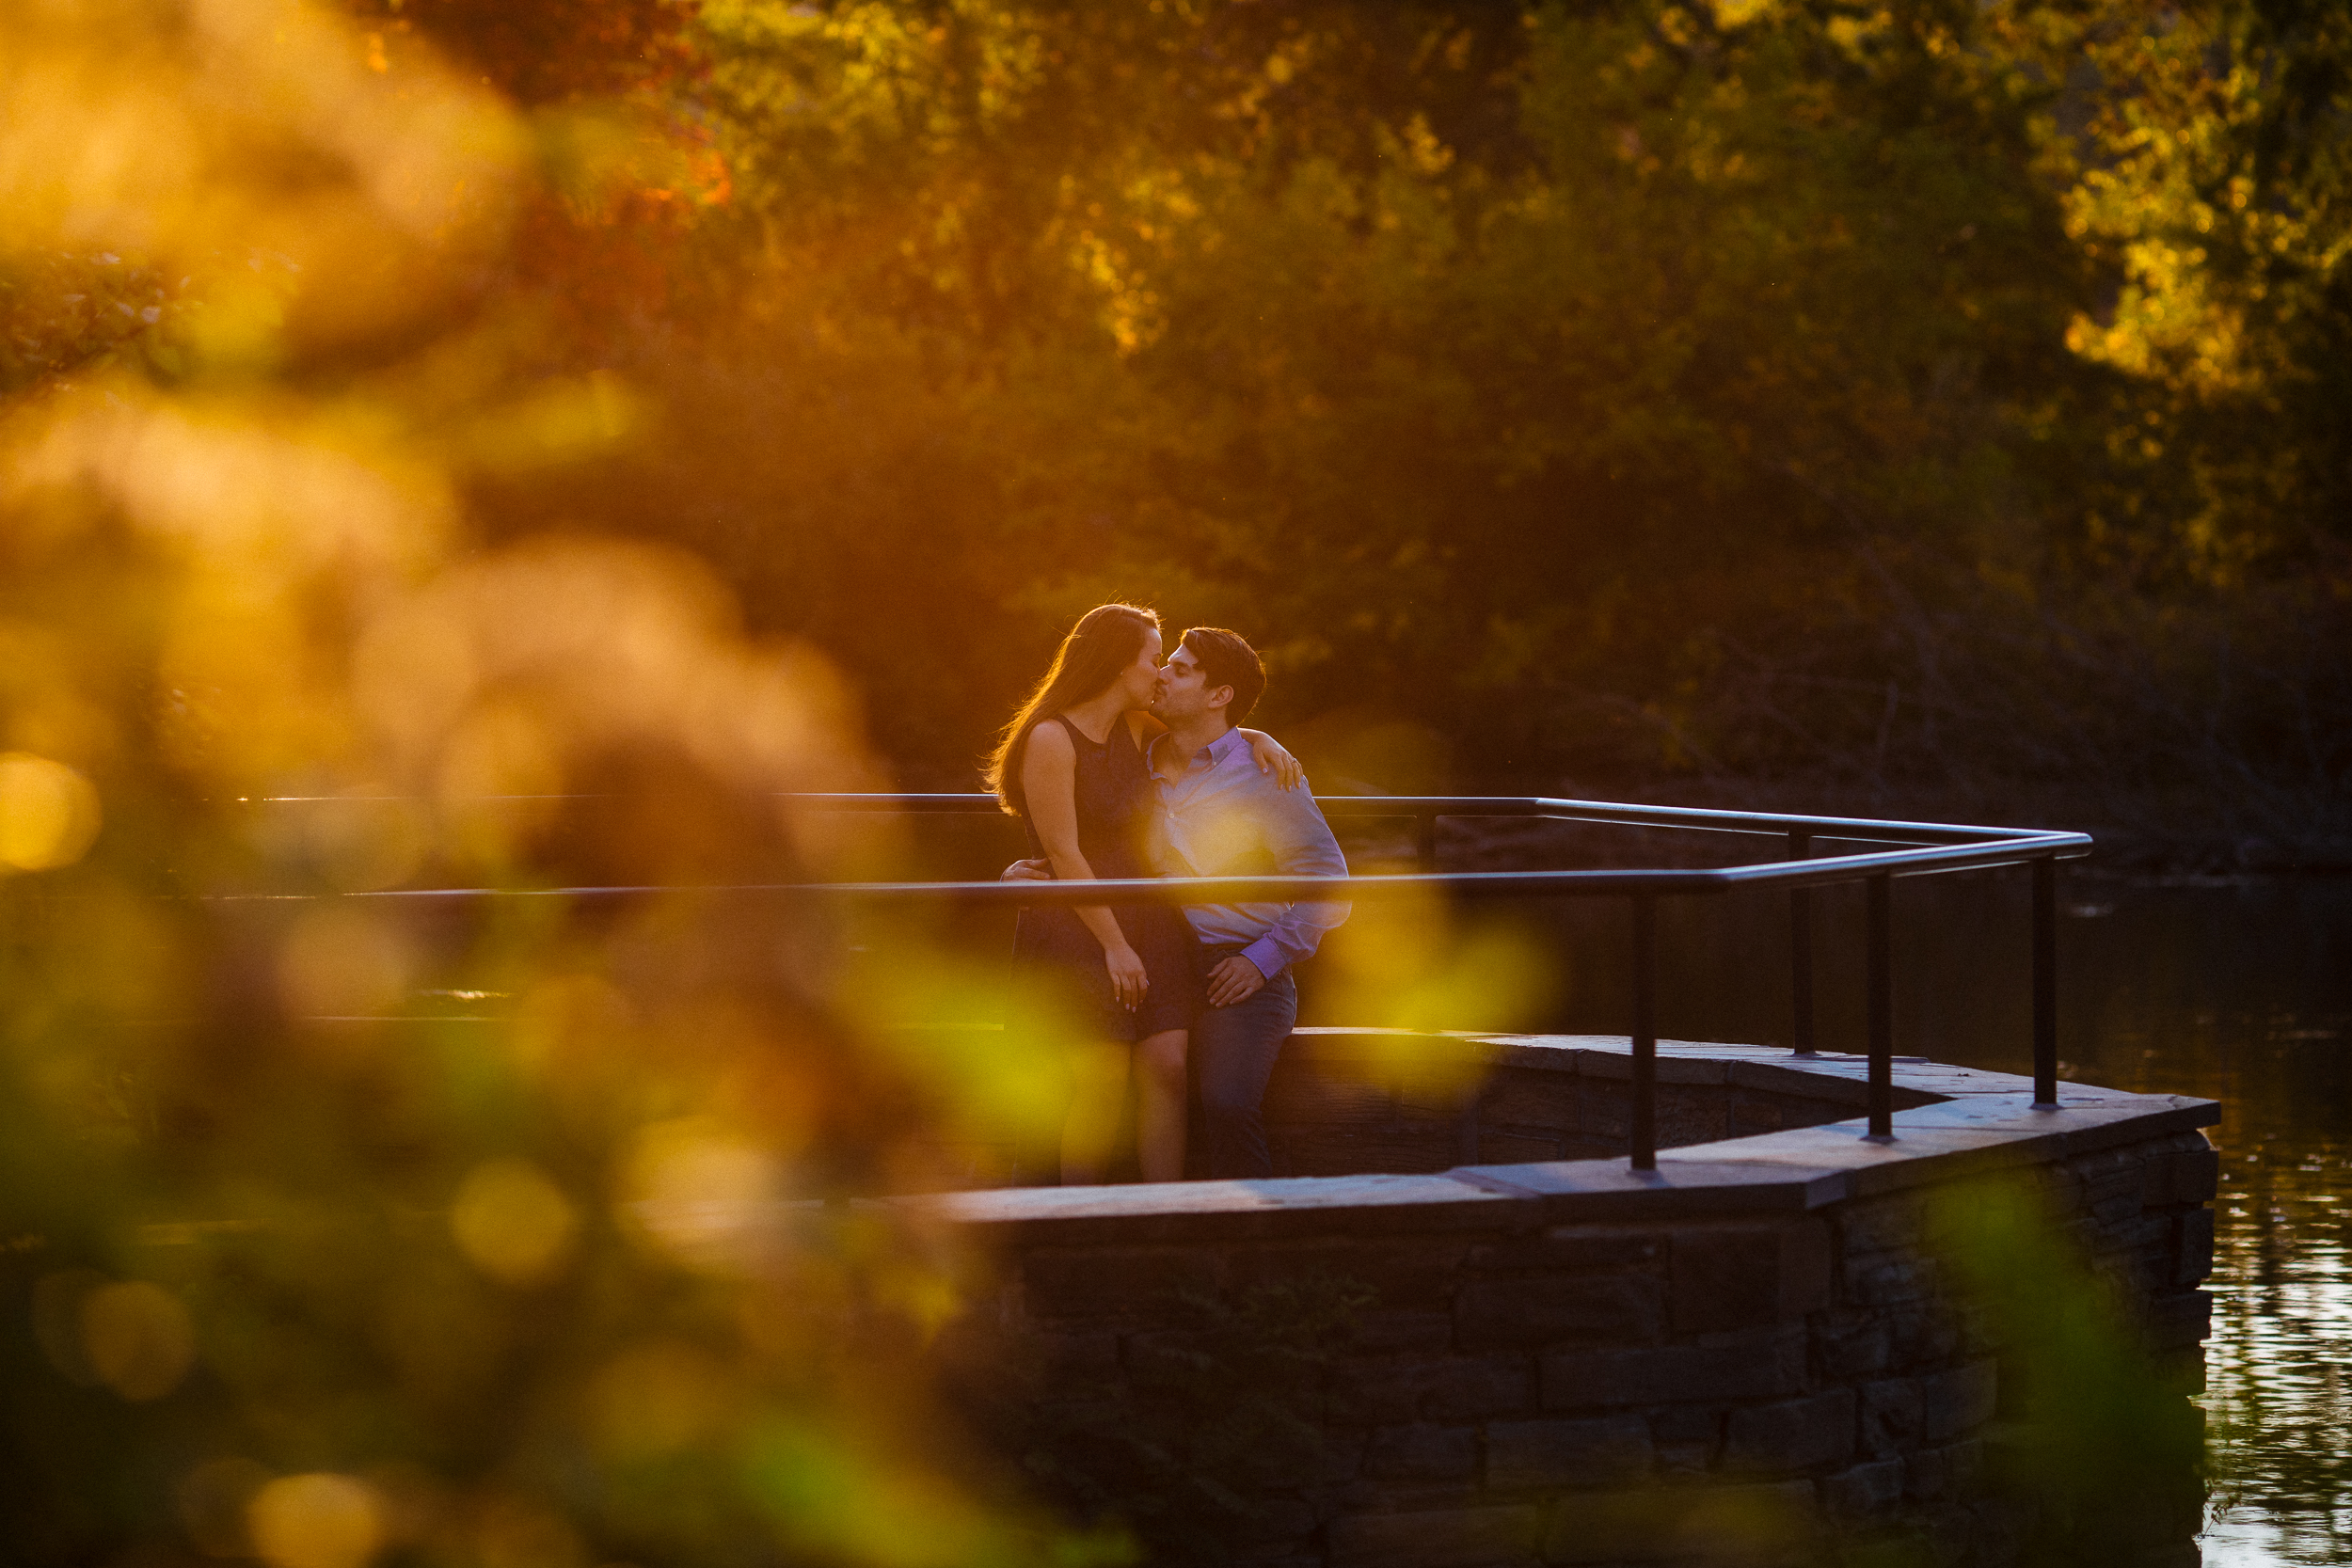 ithaca ny, ithaca ny engagement session, ithaca ny engagement, ithaca ny engagement photographer, ithaca ny engagement photography, engagement, engagement photography, engagement photographer, stewart park, stewart park ithaca ny, stewart park engagement session, stewart park engagement photography, stewart park engagement photographer, fall engagement session, fall engagement inspo, engagement session inspo, outdoor engagement session, sunset engagement session, golden hour engagement